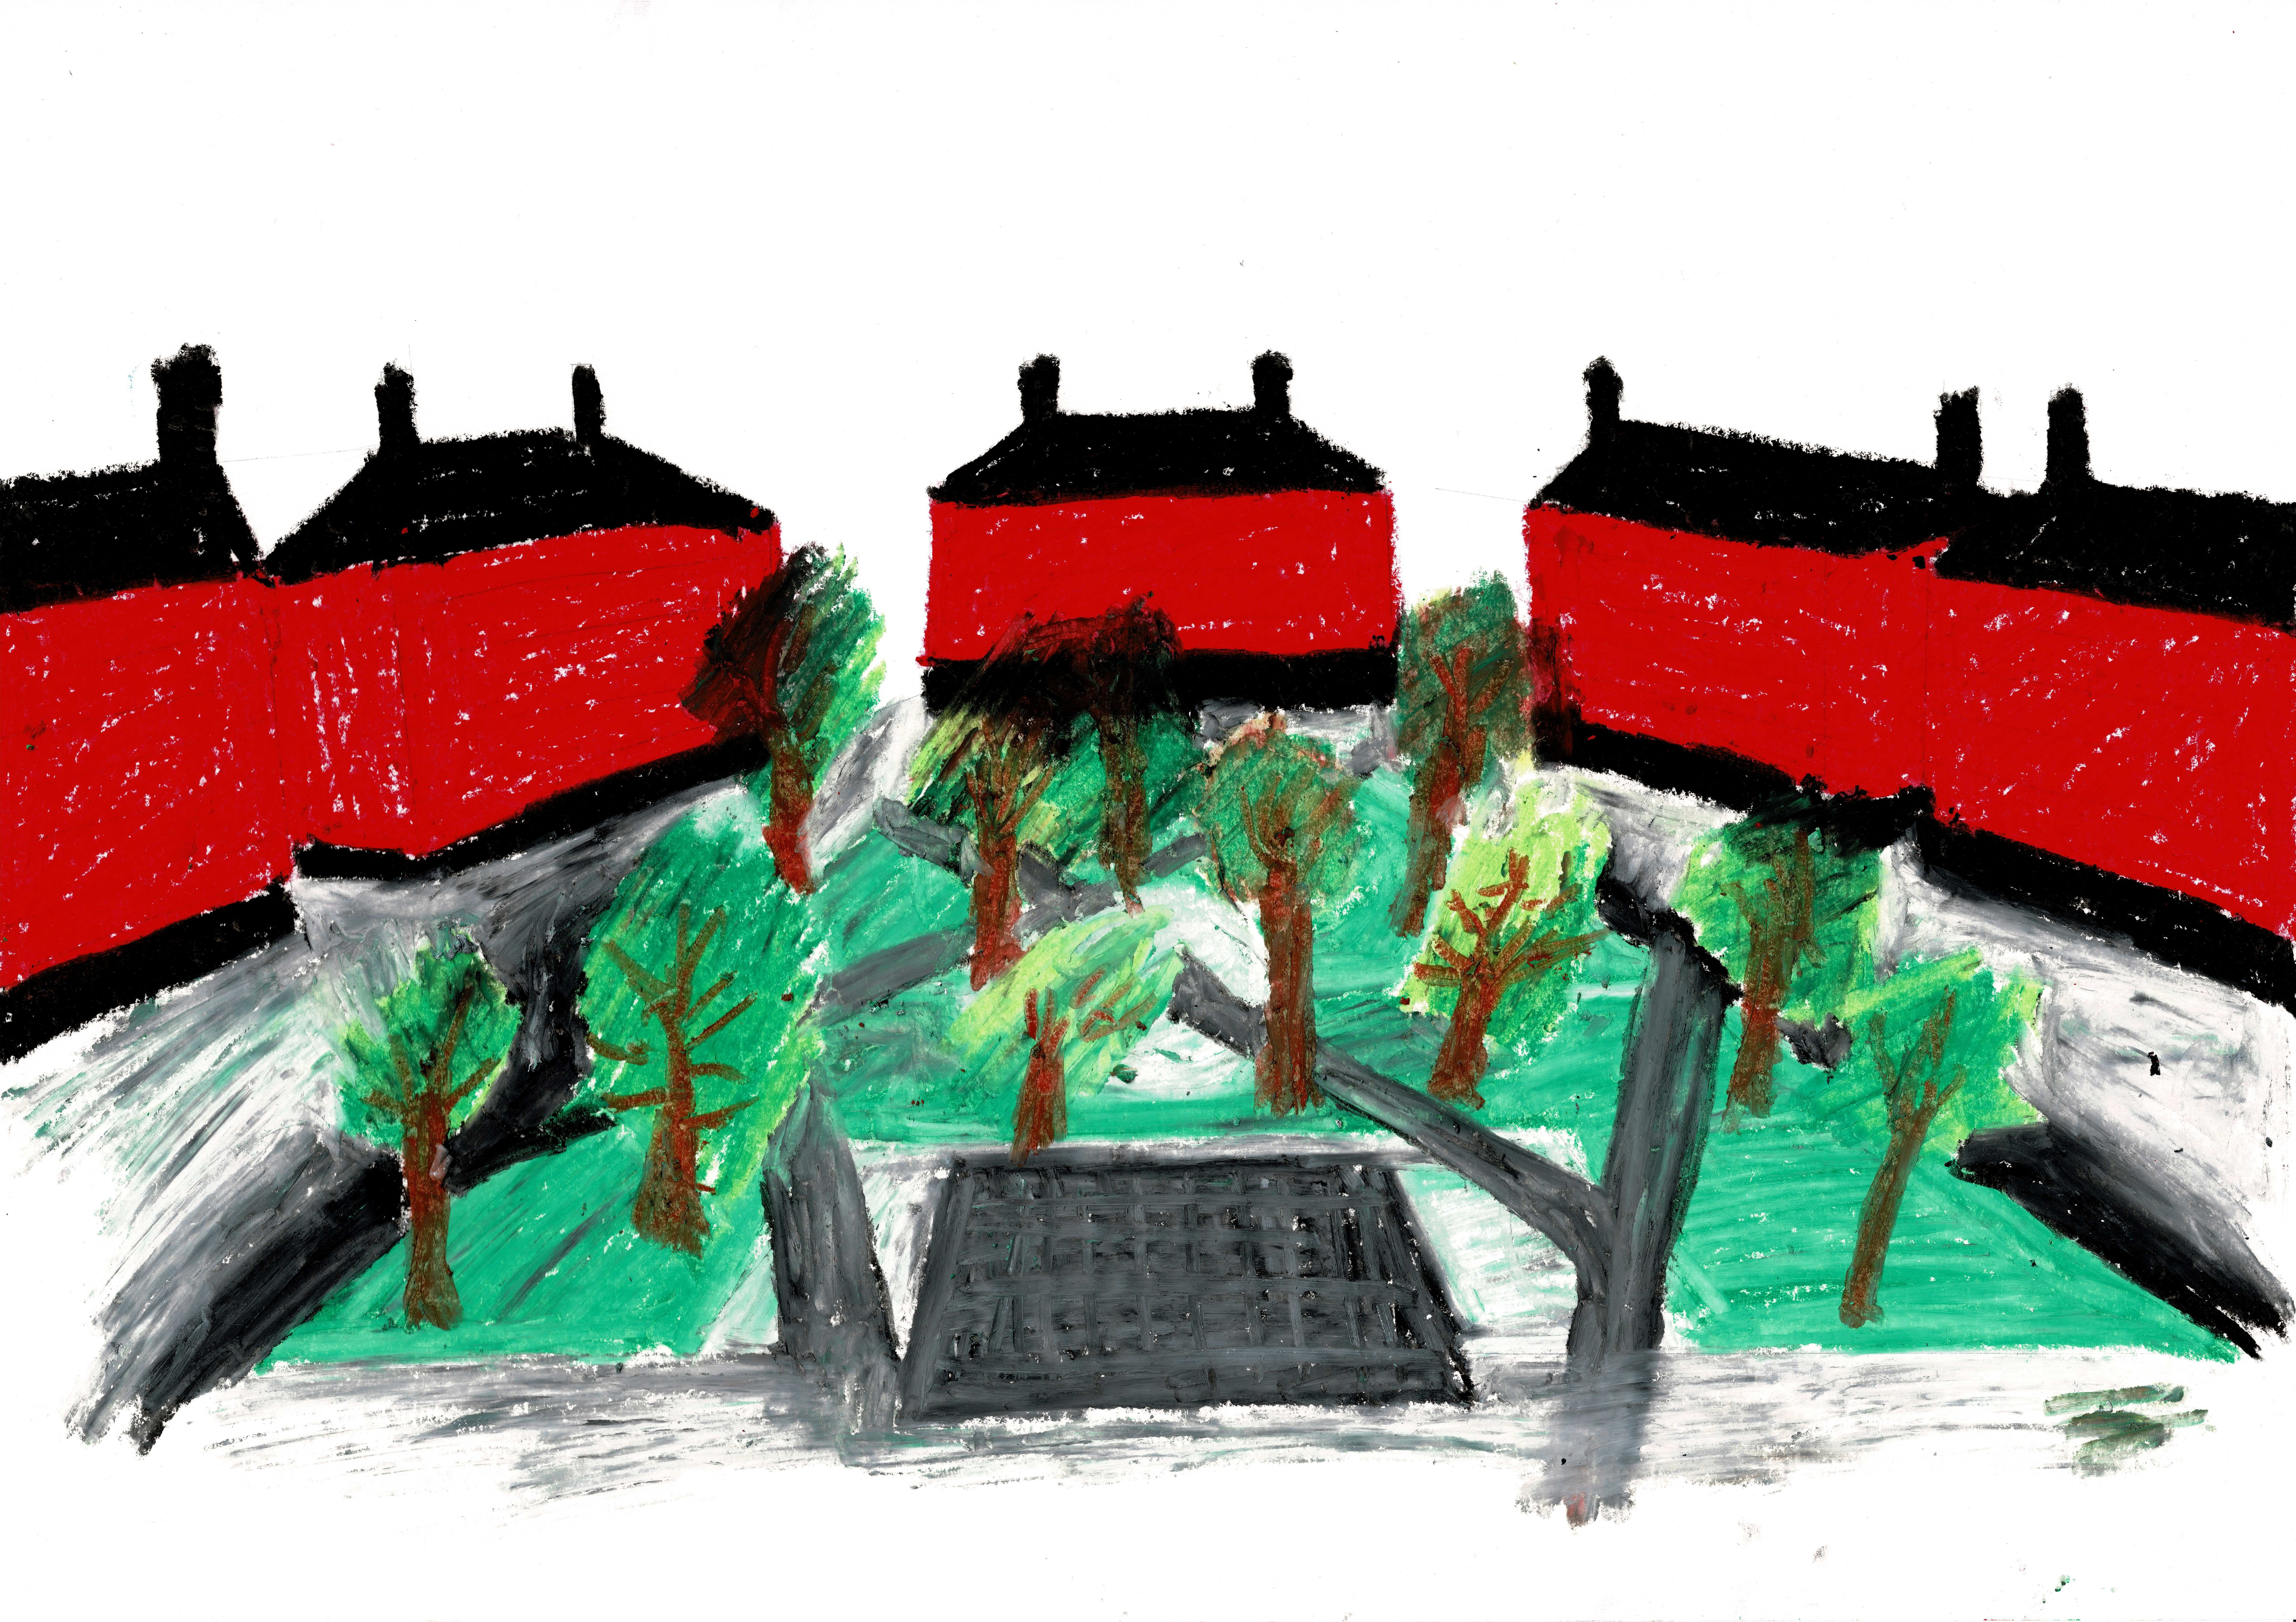 pastel drawing of five red buildings surrounding an inner courtyard filled with trees, all sitting atop a soccer-field with a net in the foreground